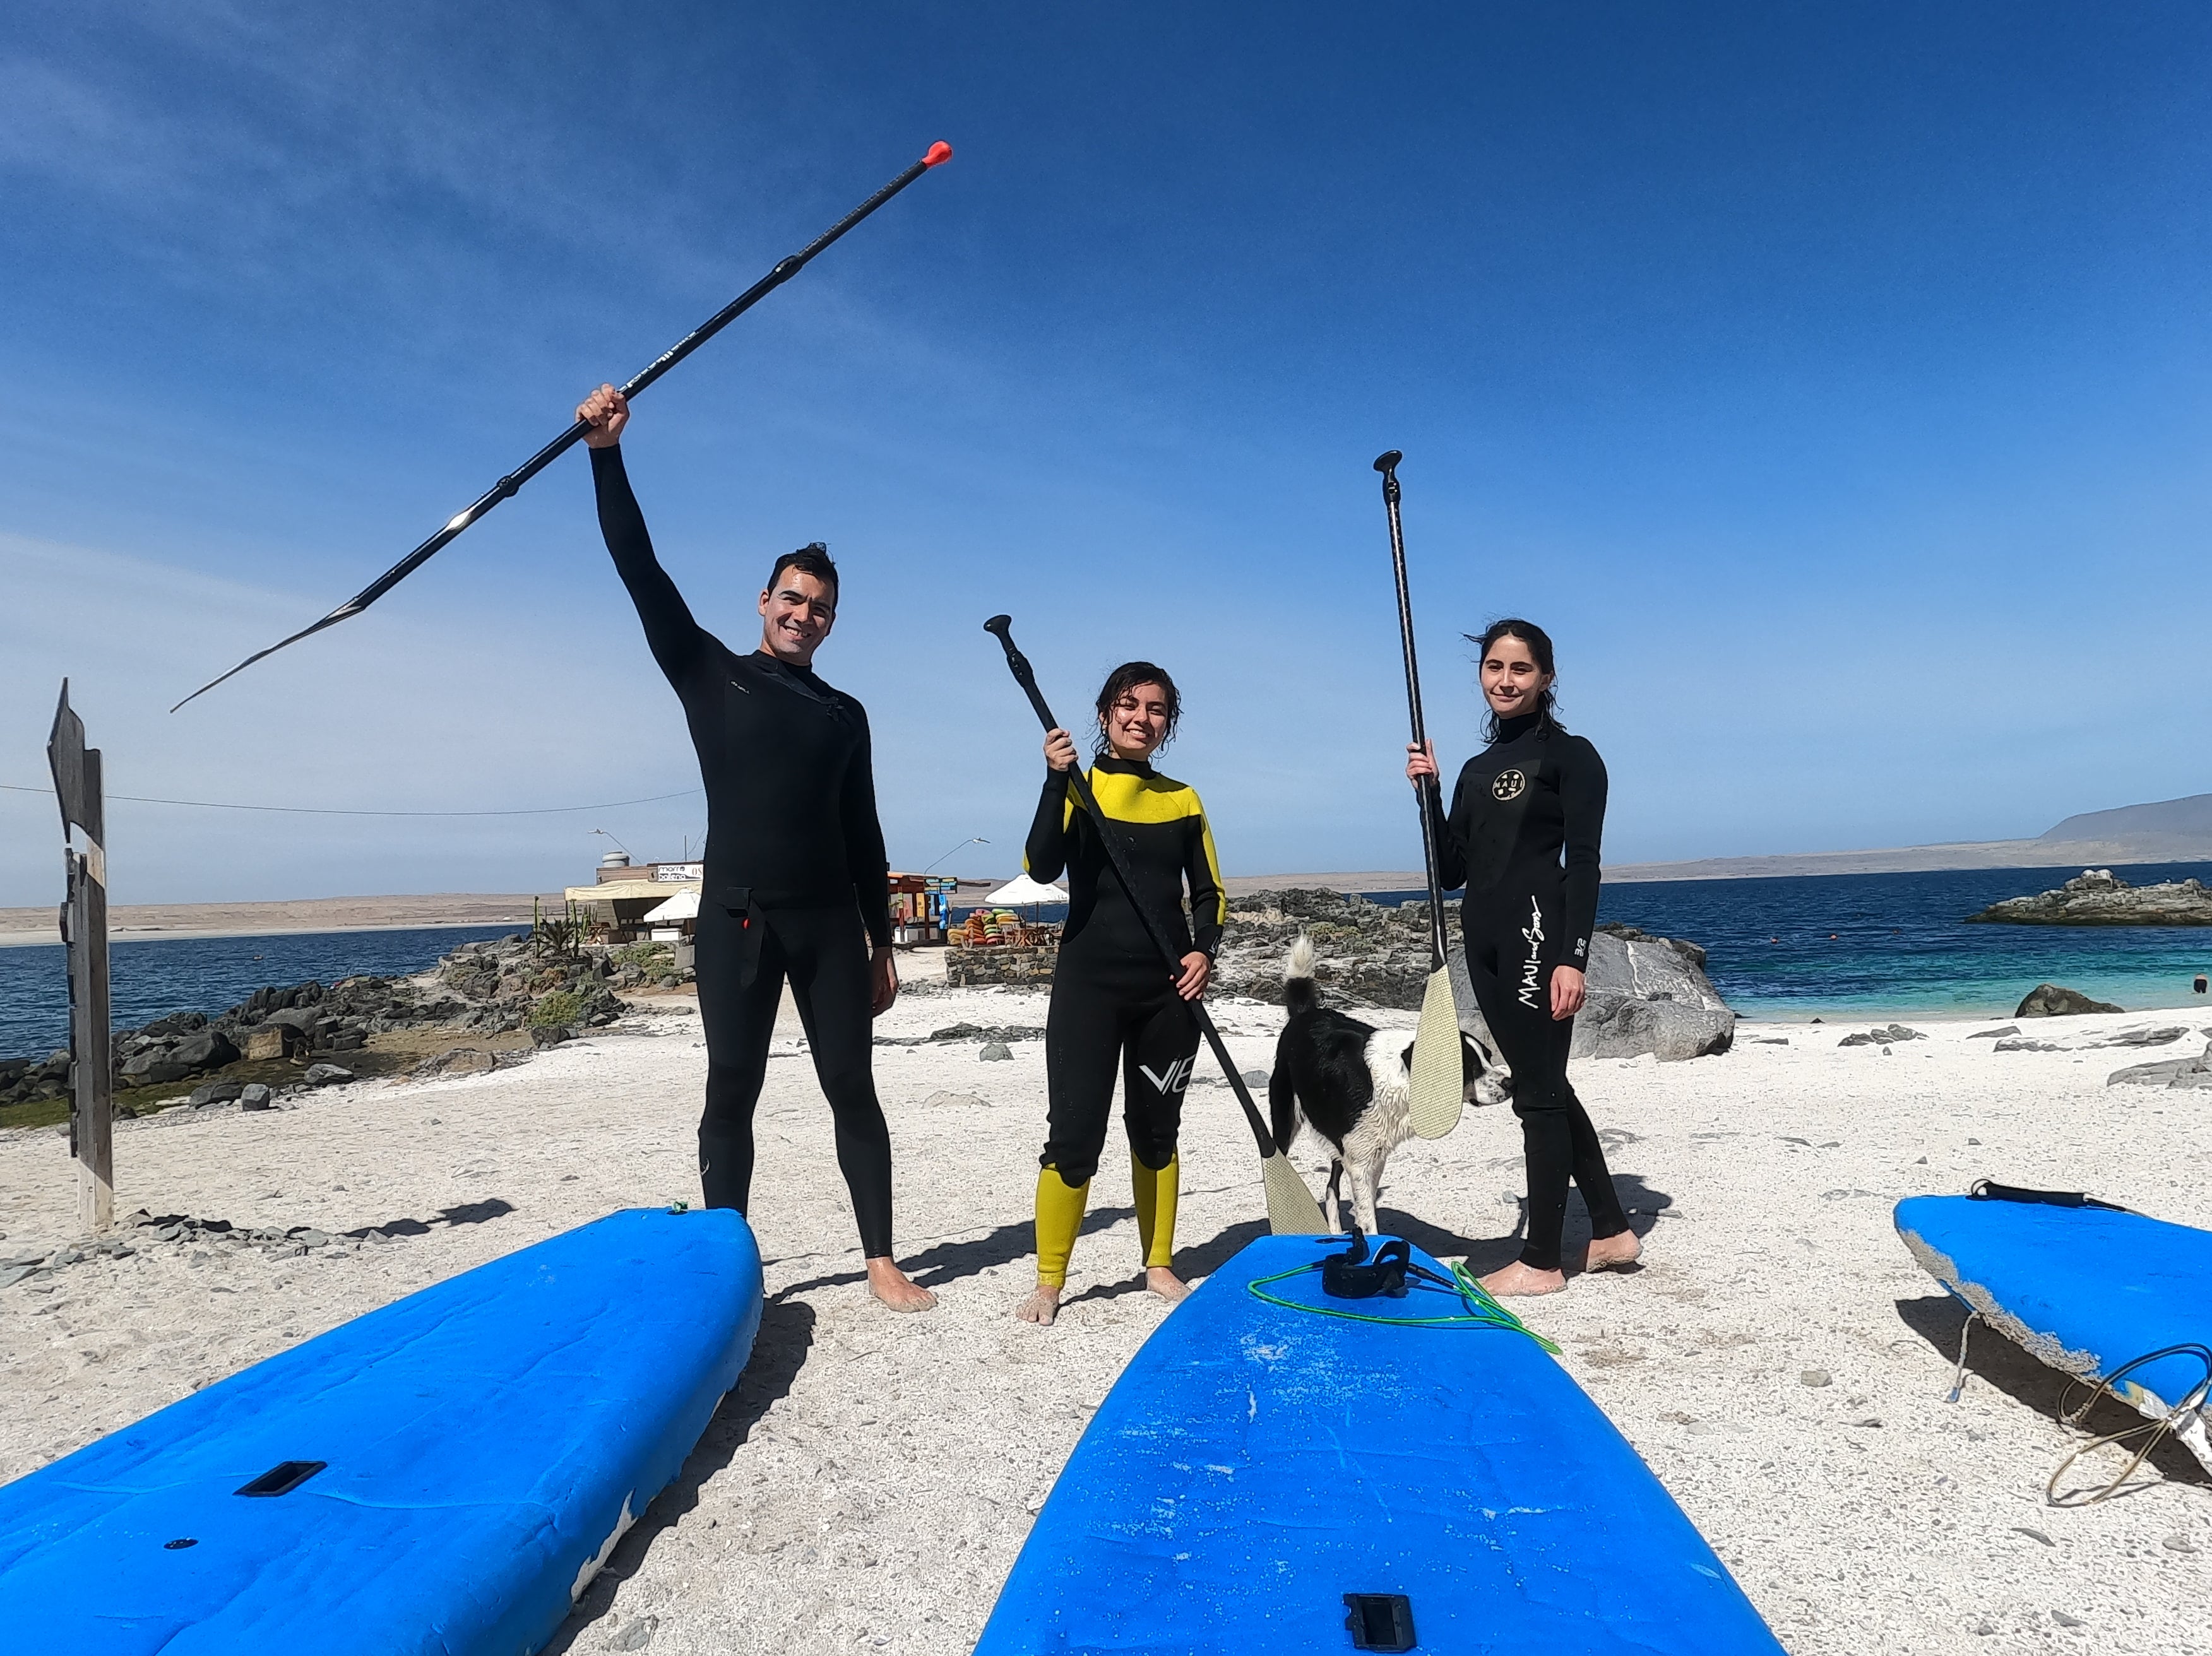 CLASE DE STAND UP PADDLE